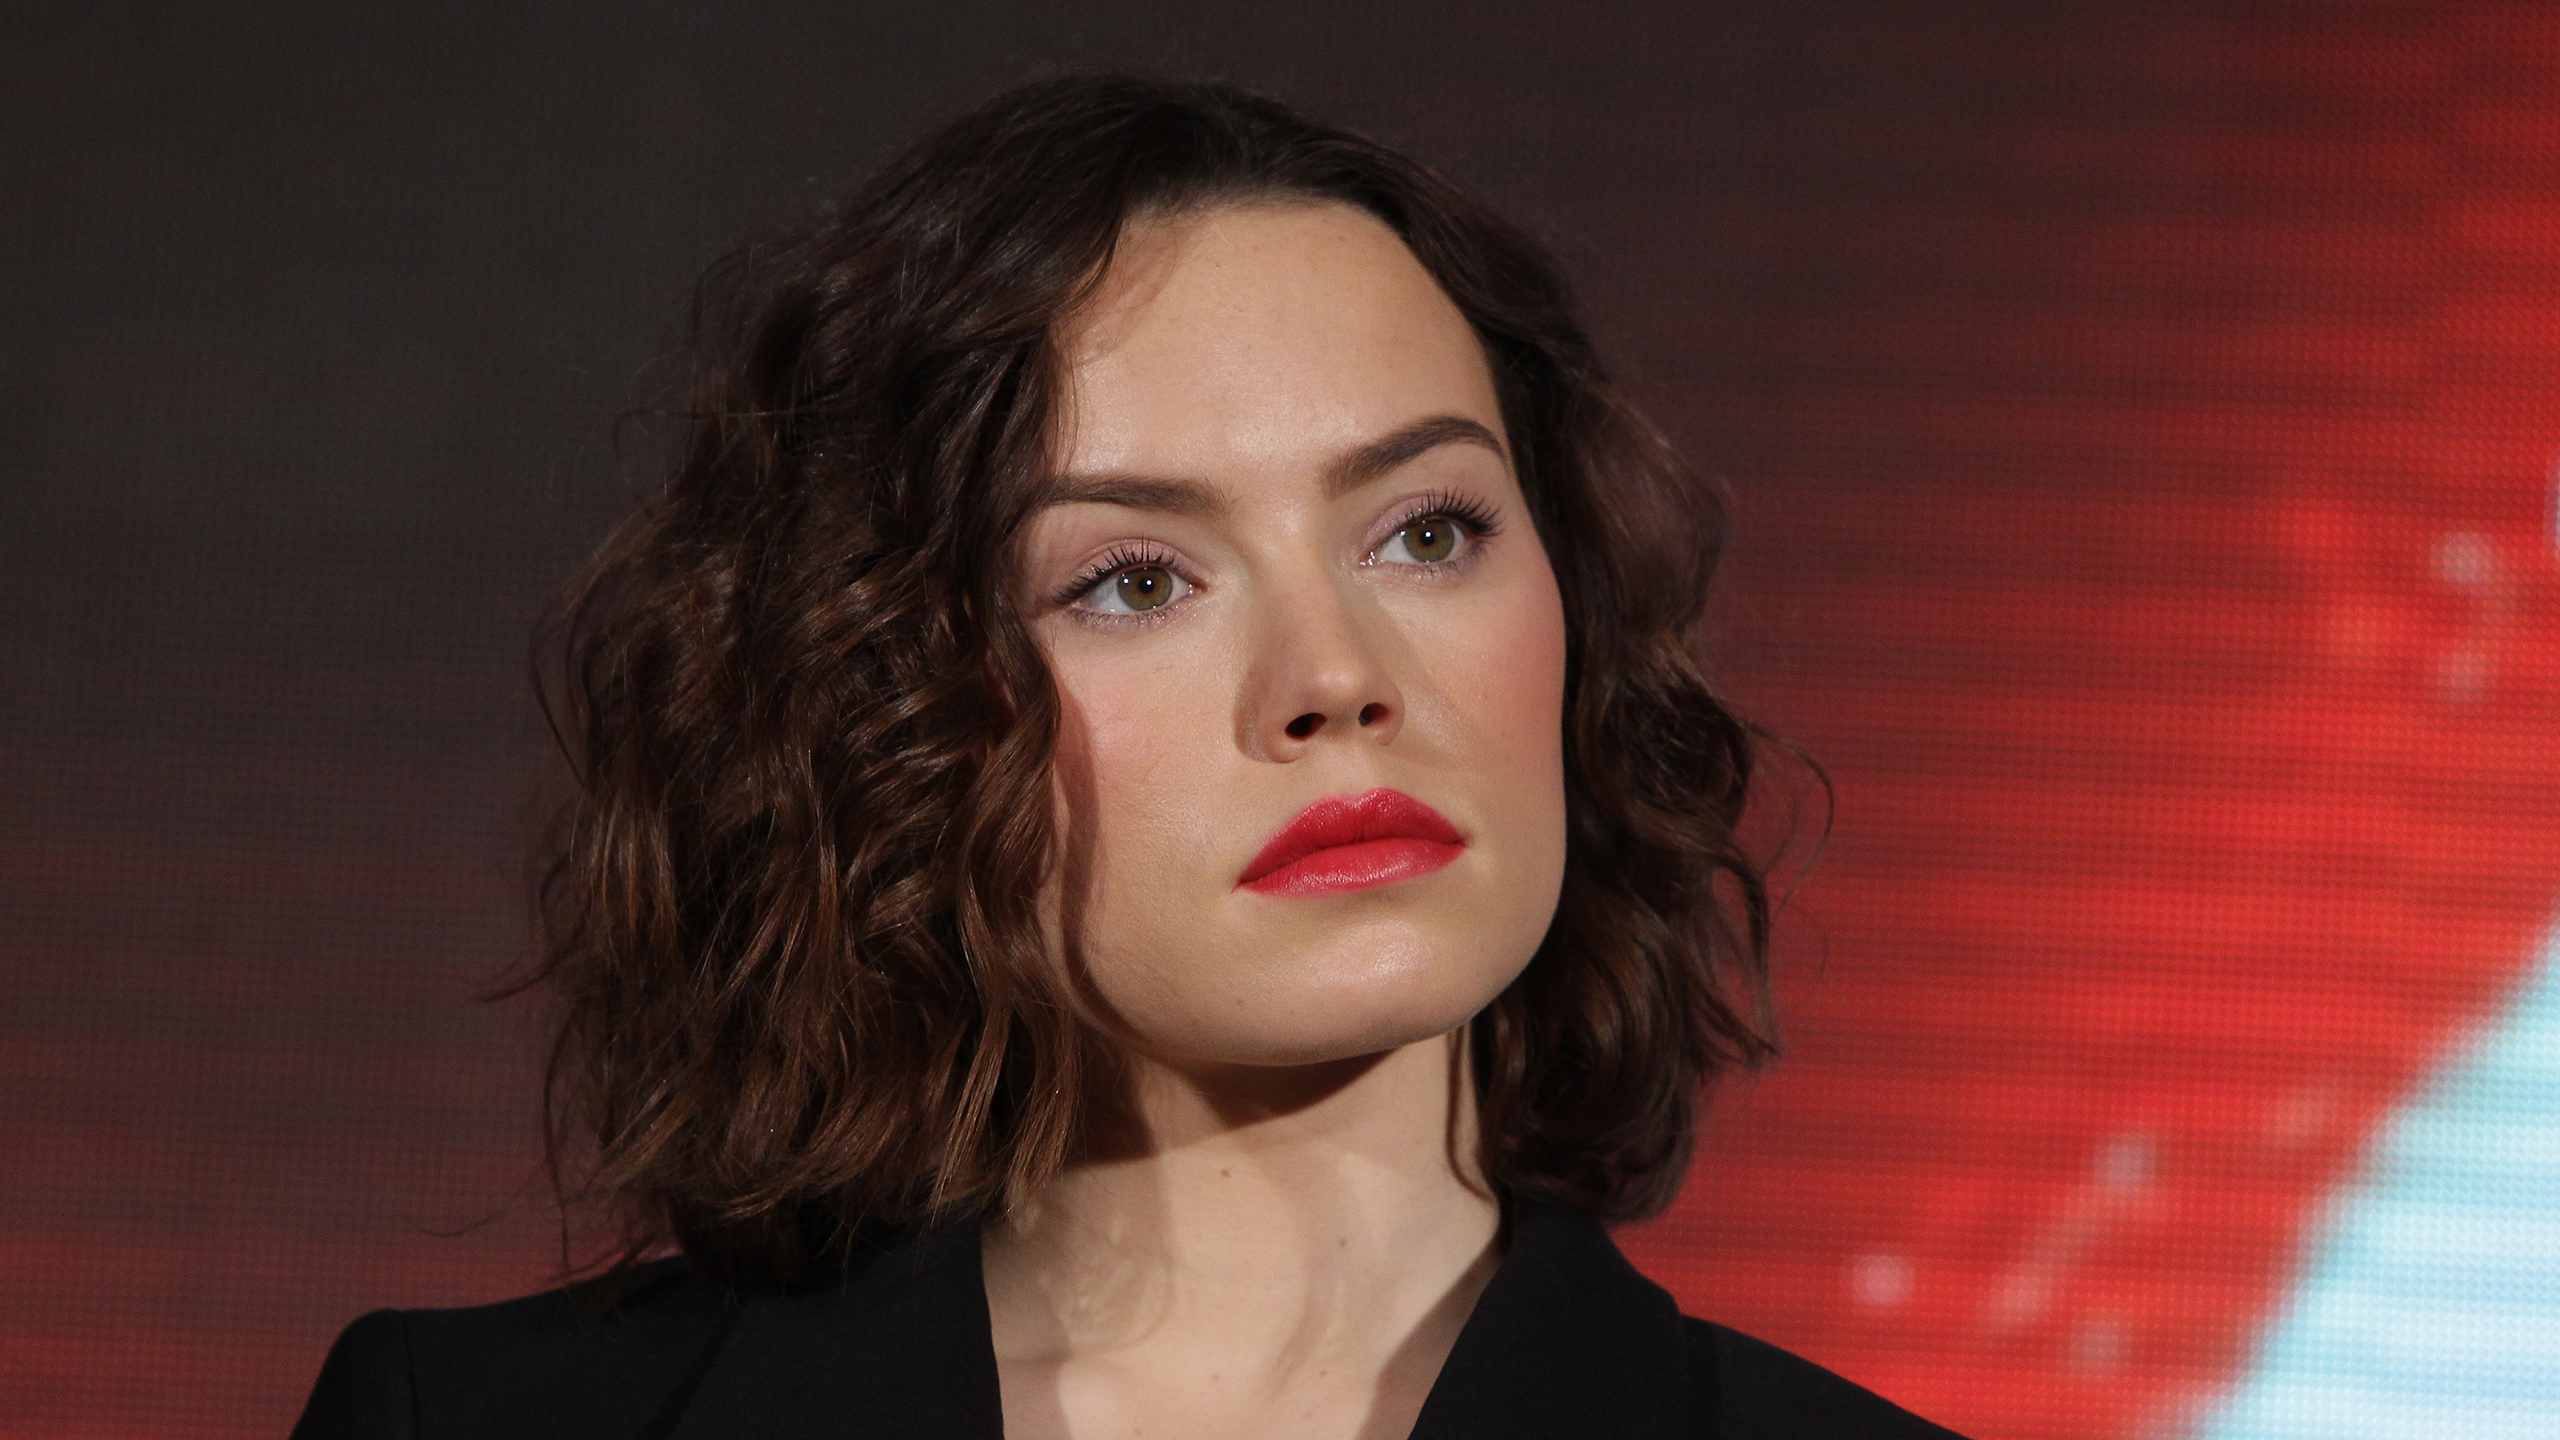 Daisy Ridley With Red Lips In Wallpaper Of Black And Red 2K Daisy Ridley